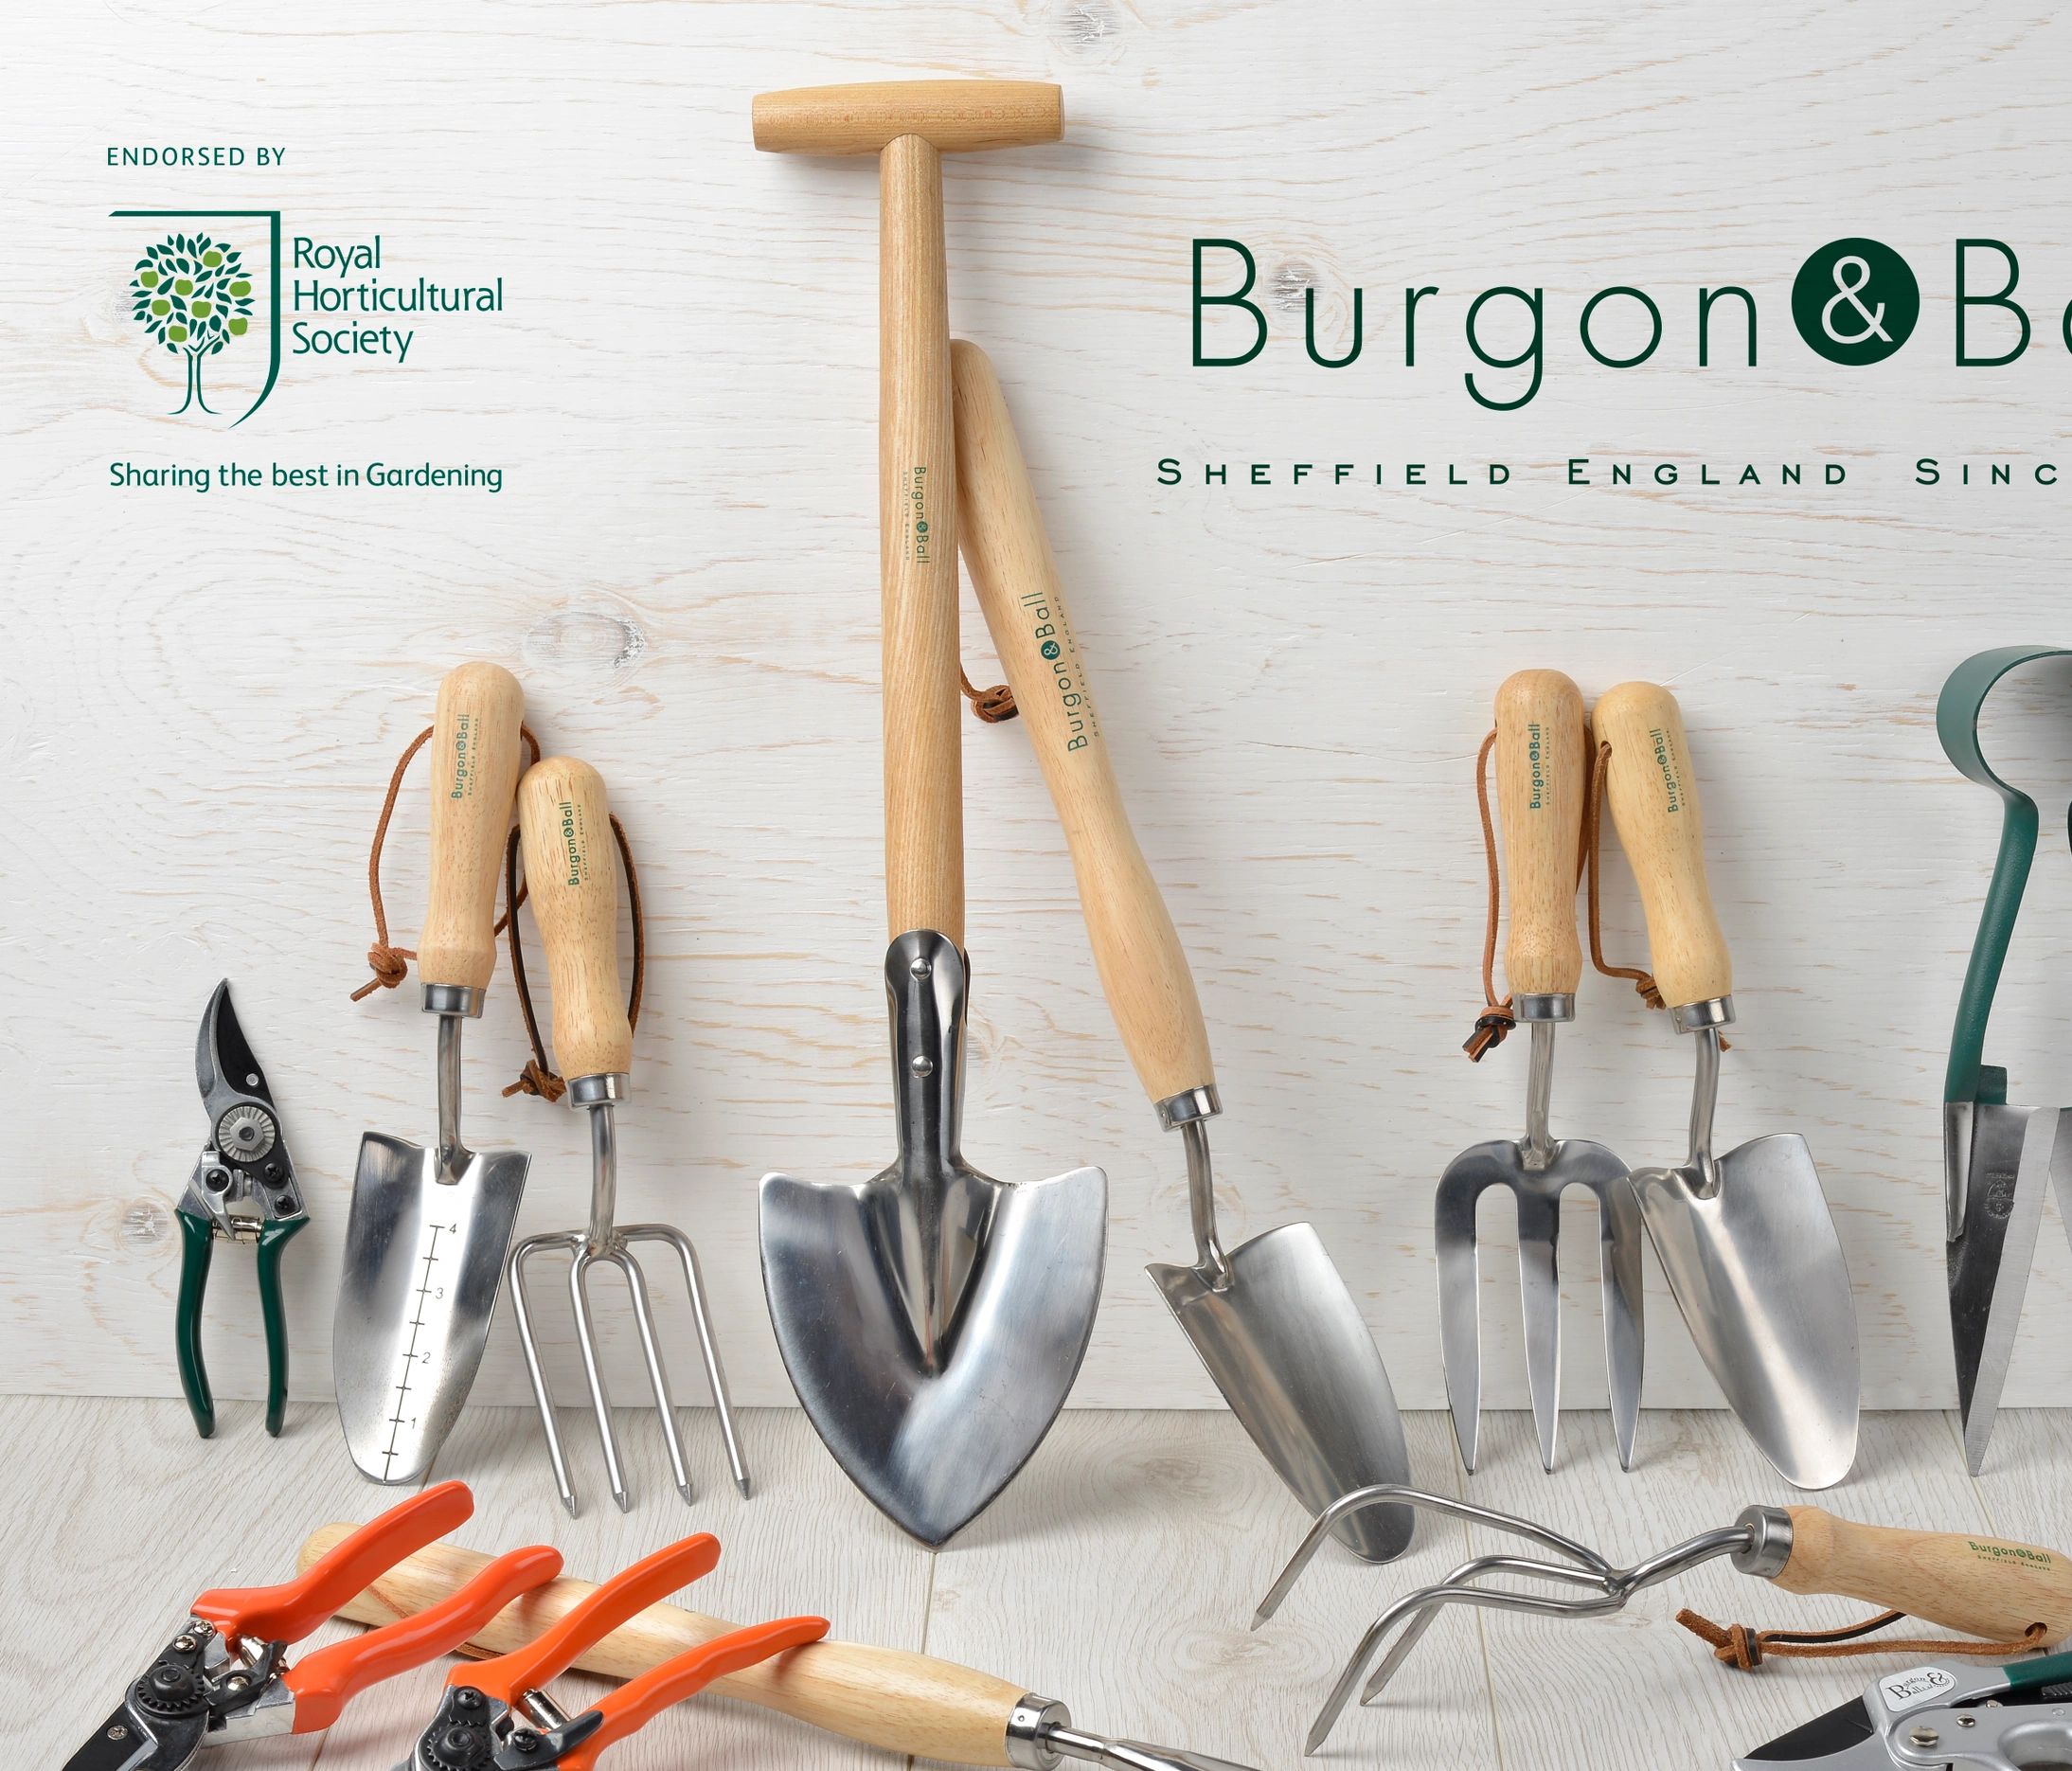 A selection of some of the most popular Burgon & Ball hand tools